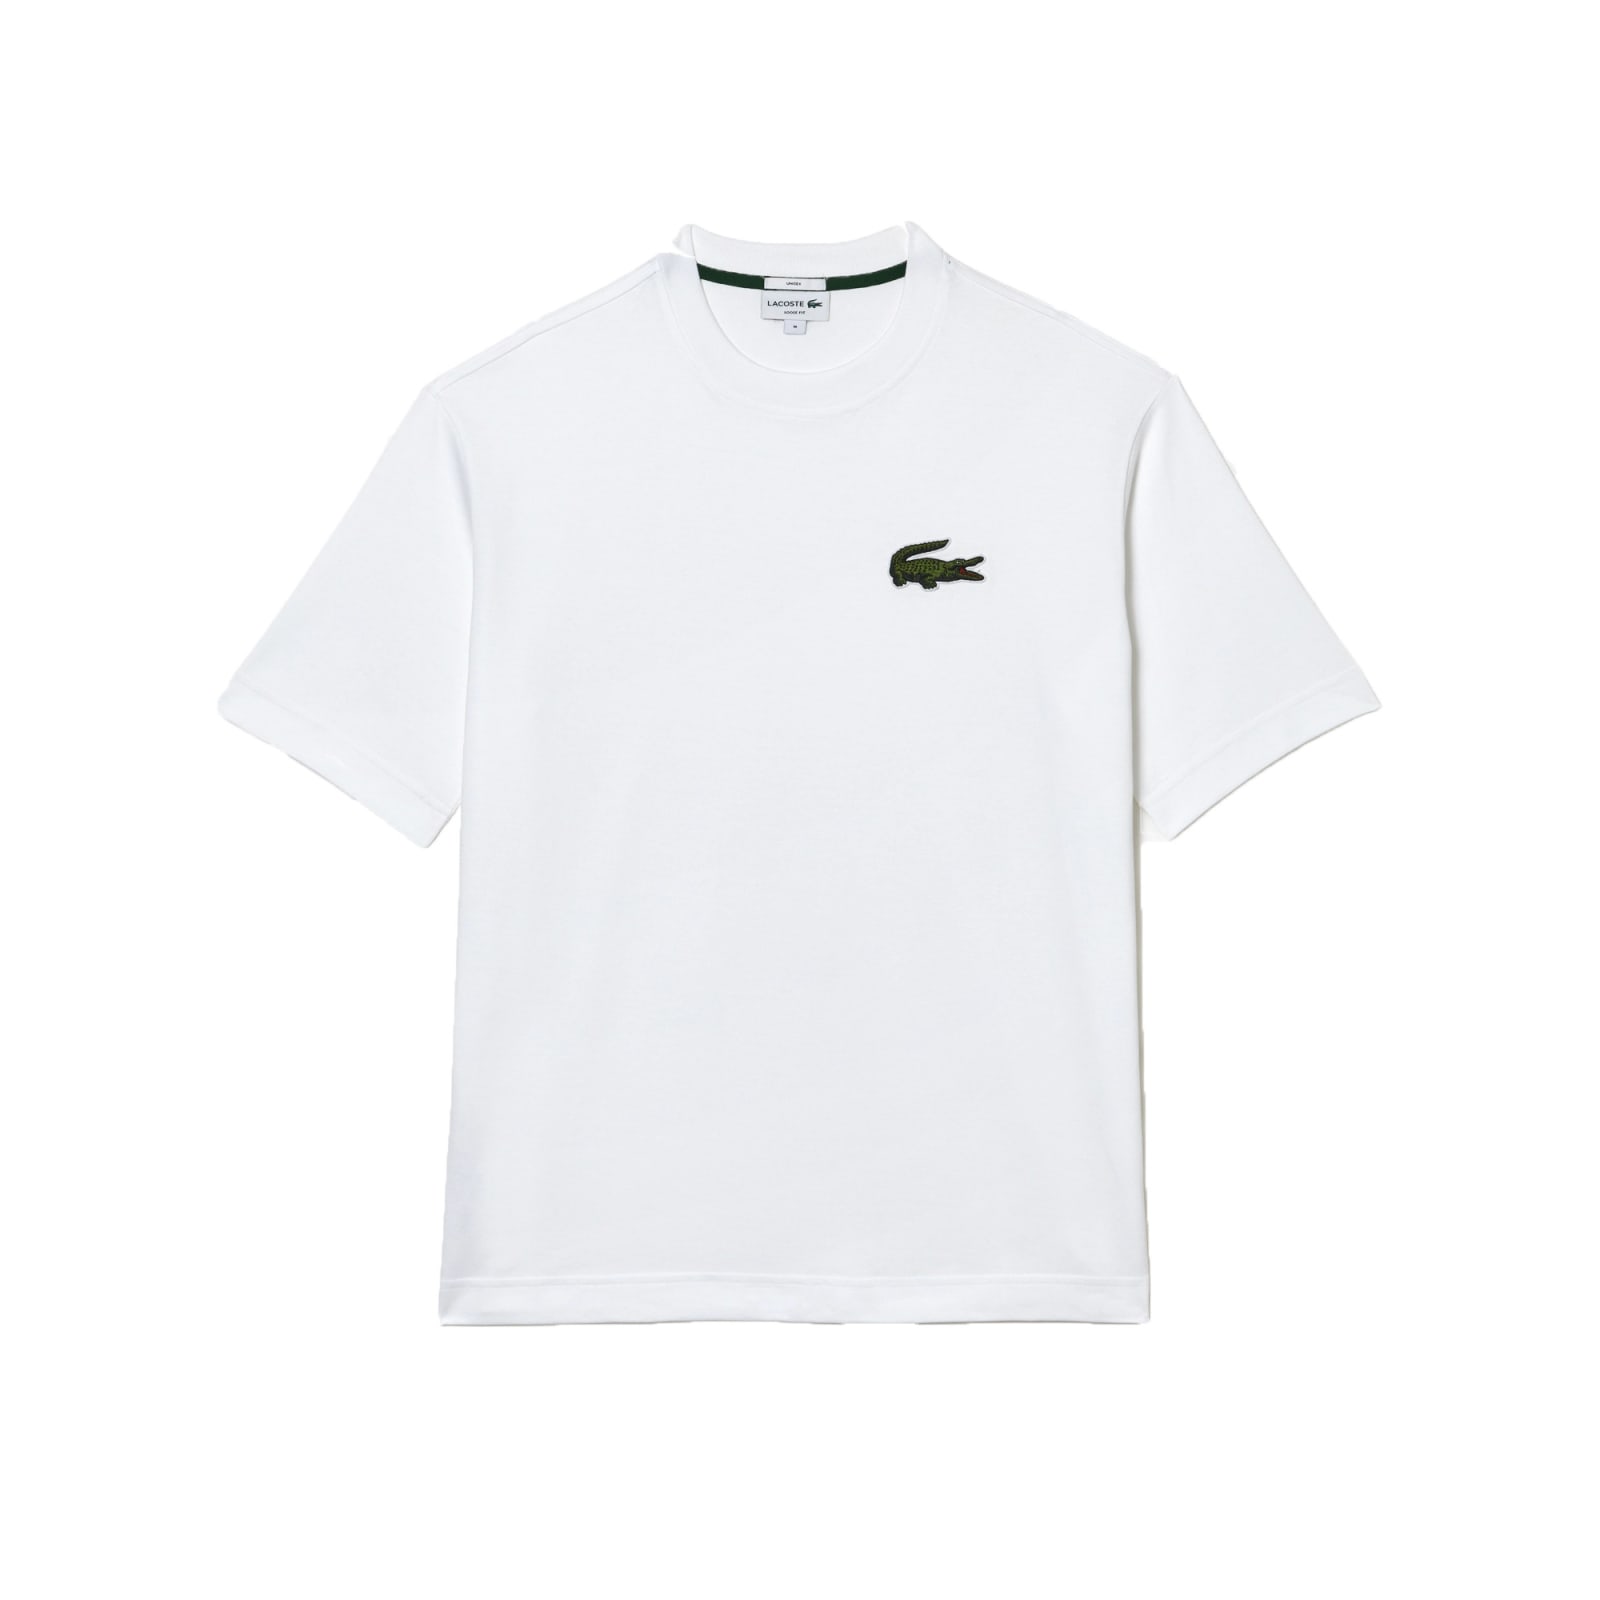 Lacoste T-shirt White Cotton Oversized T-shirt With Big Crocodile Patch.